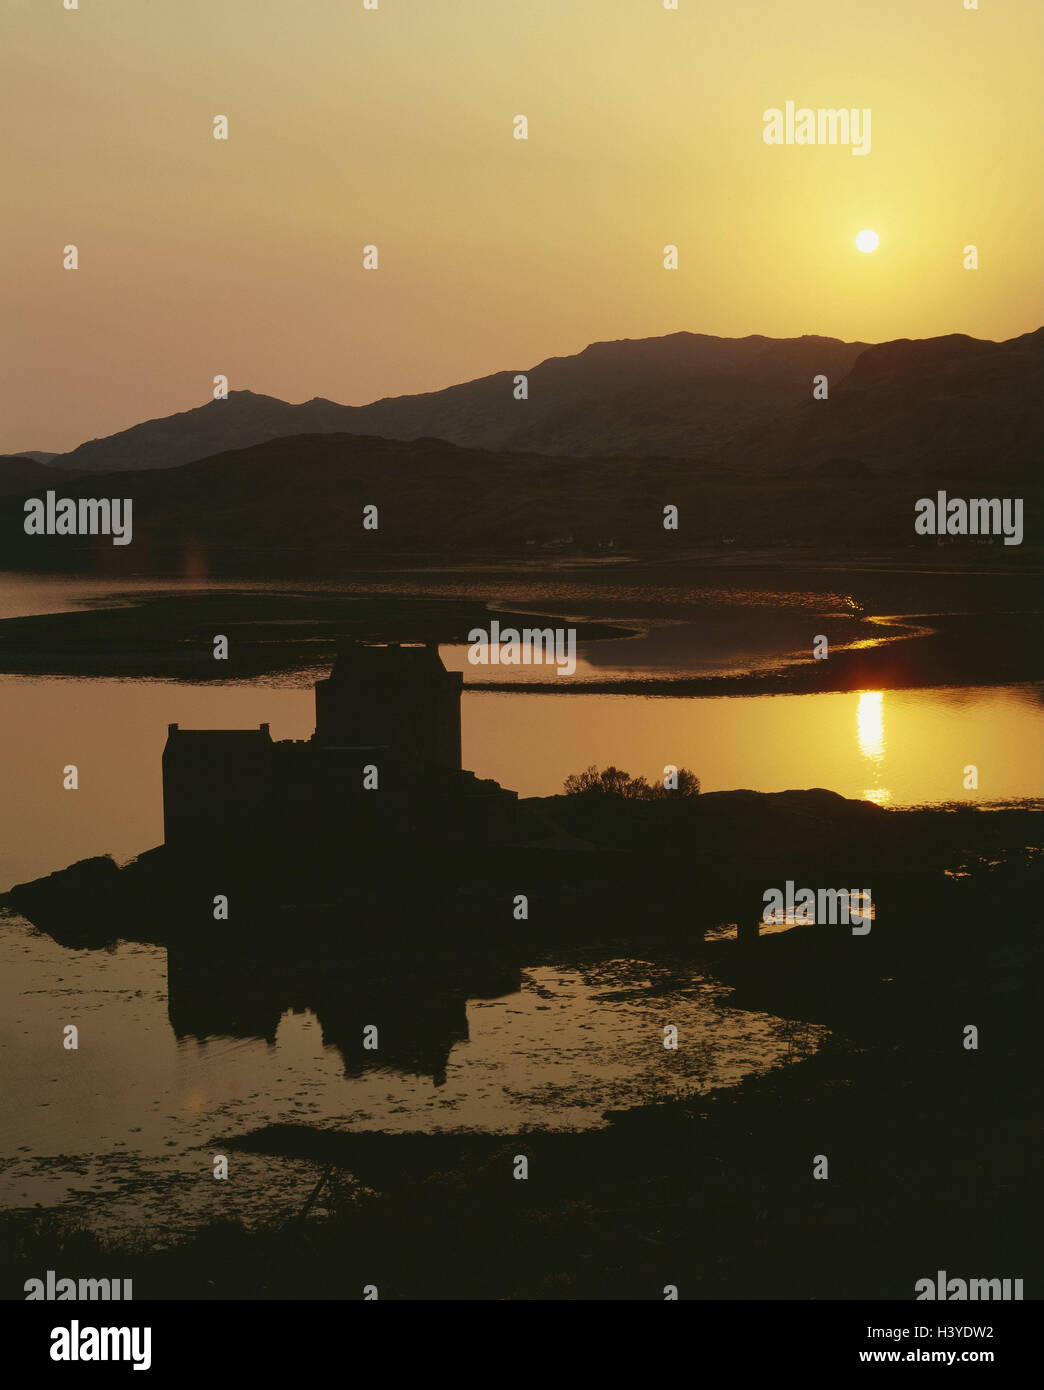 Great Britain, Scotland, highland, Eilean Donan Castle, hole Duich, sundown, Europe, highlands, lake, island, place of interest, architecture, building, structure, castle, fortress, builds in 1220, scenery, Stock Photo